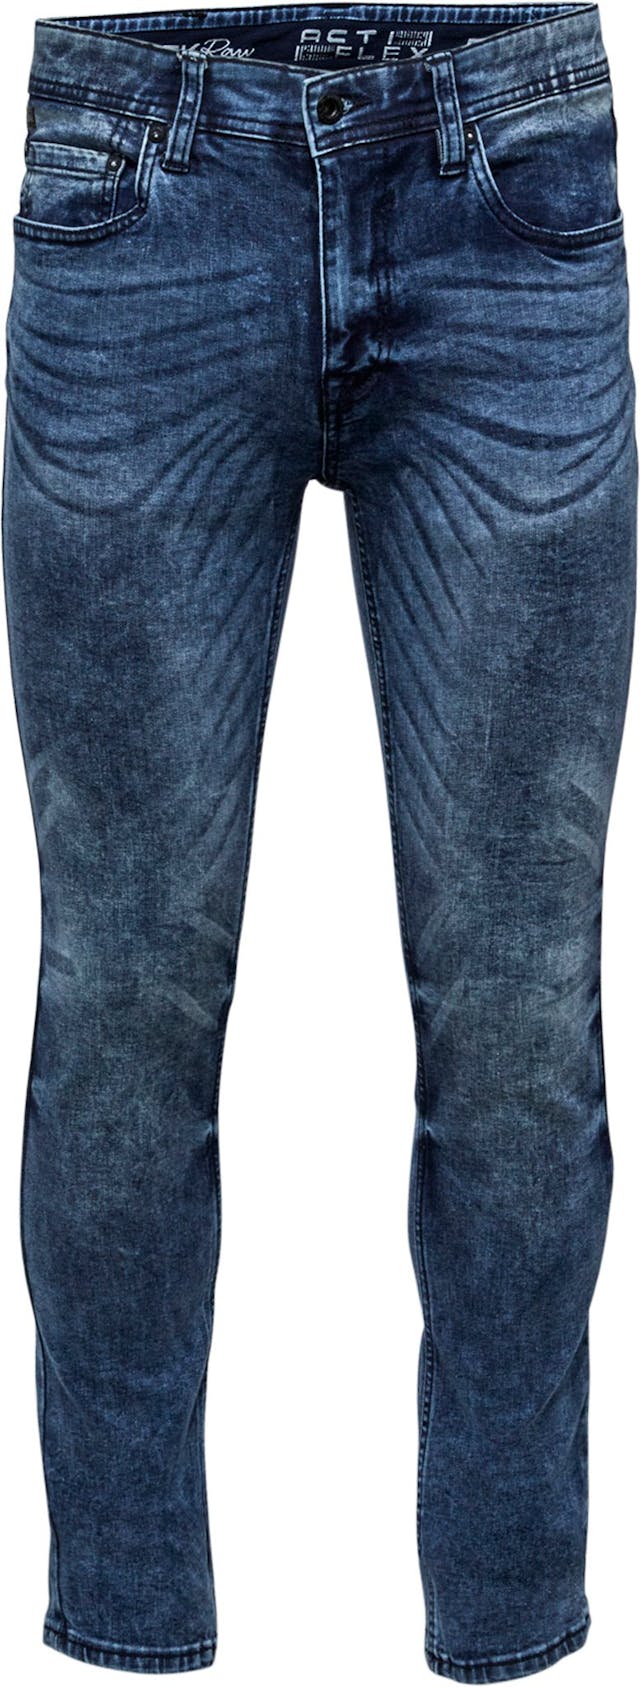 Product image for Slim Fit Jean - Men's